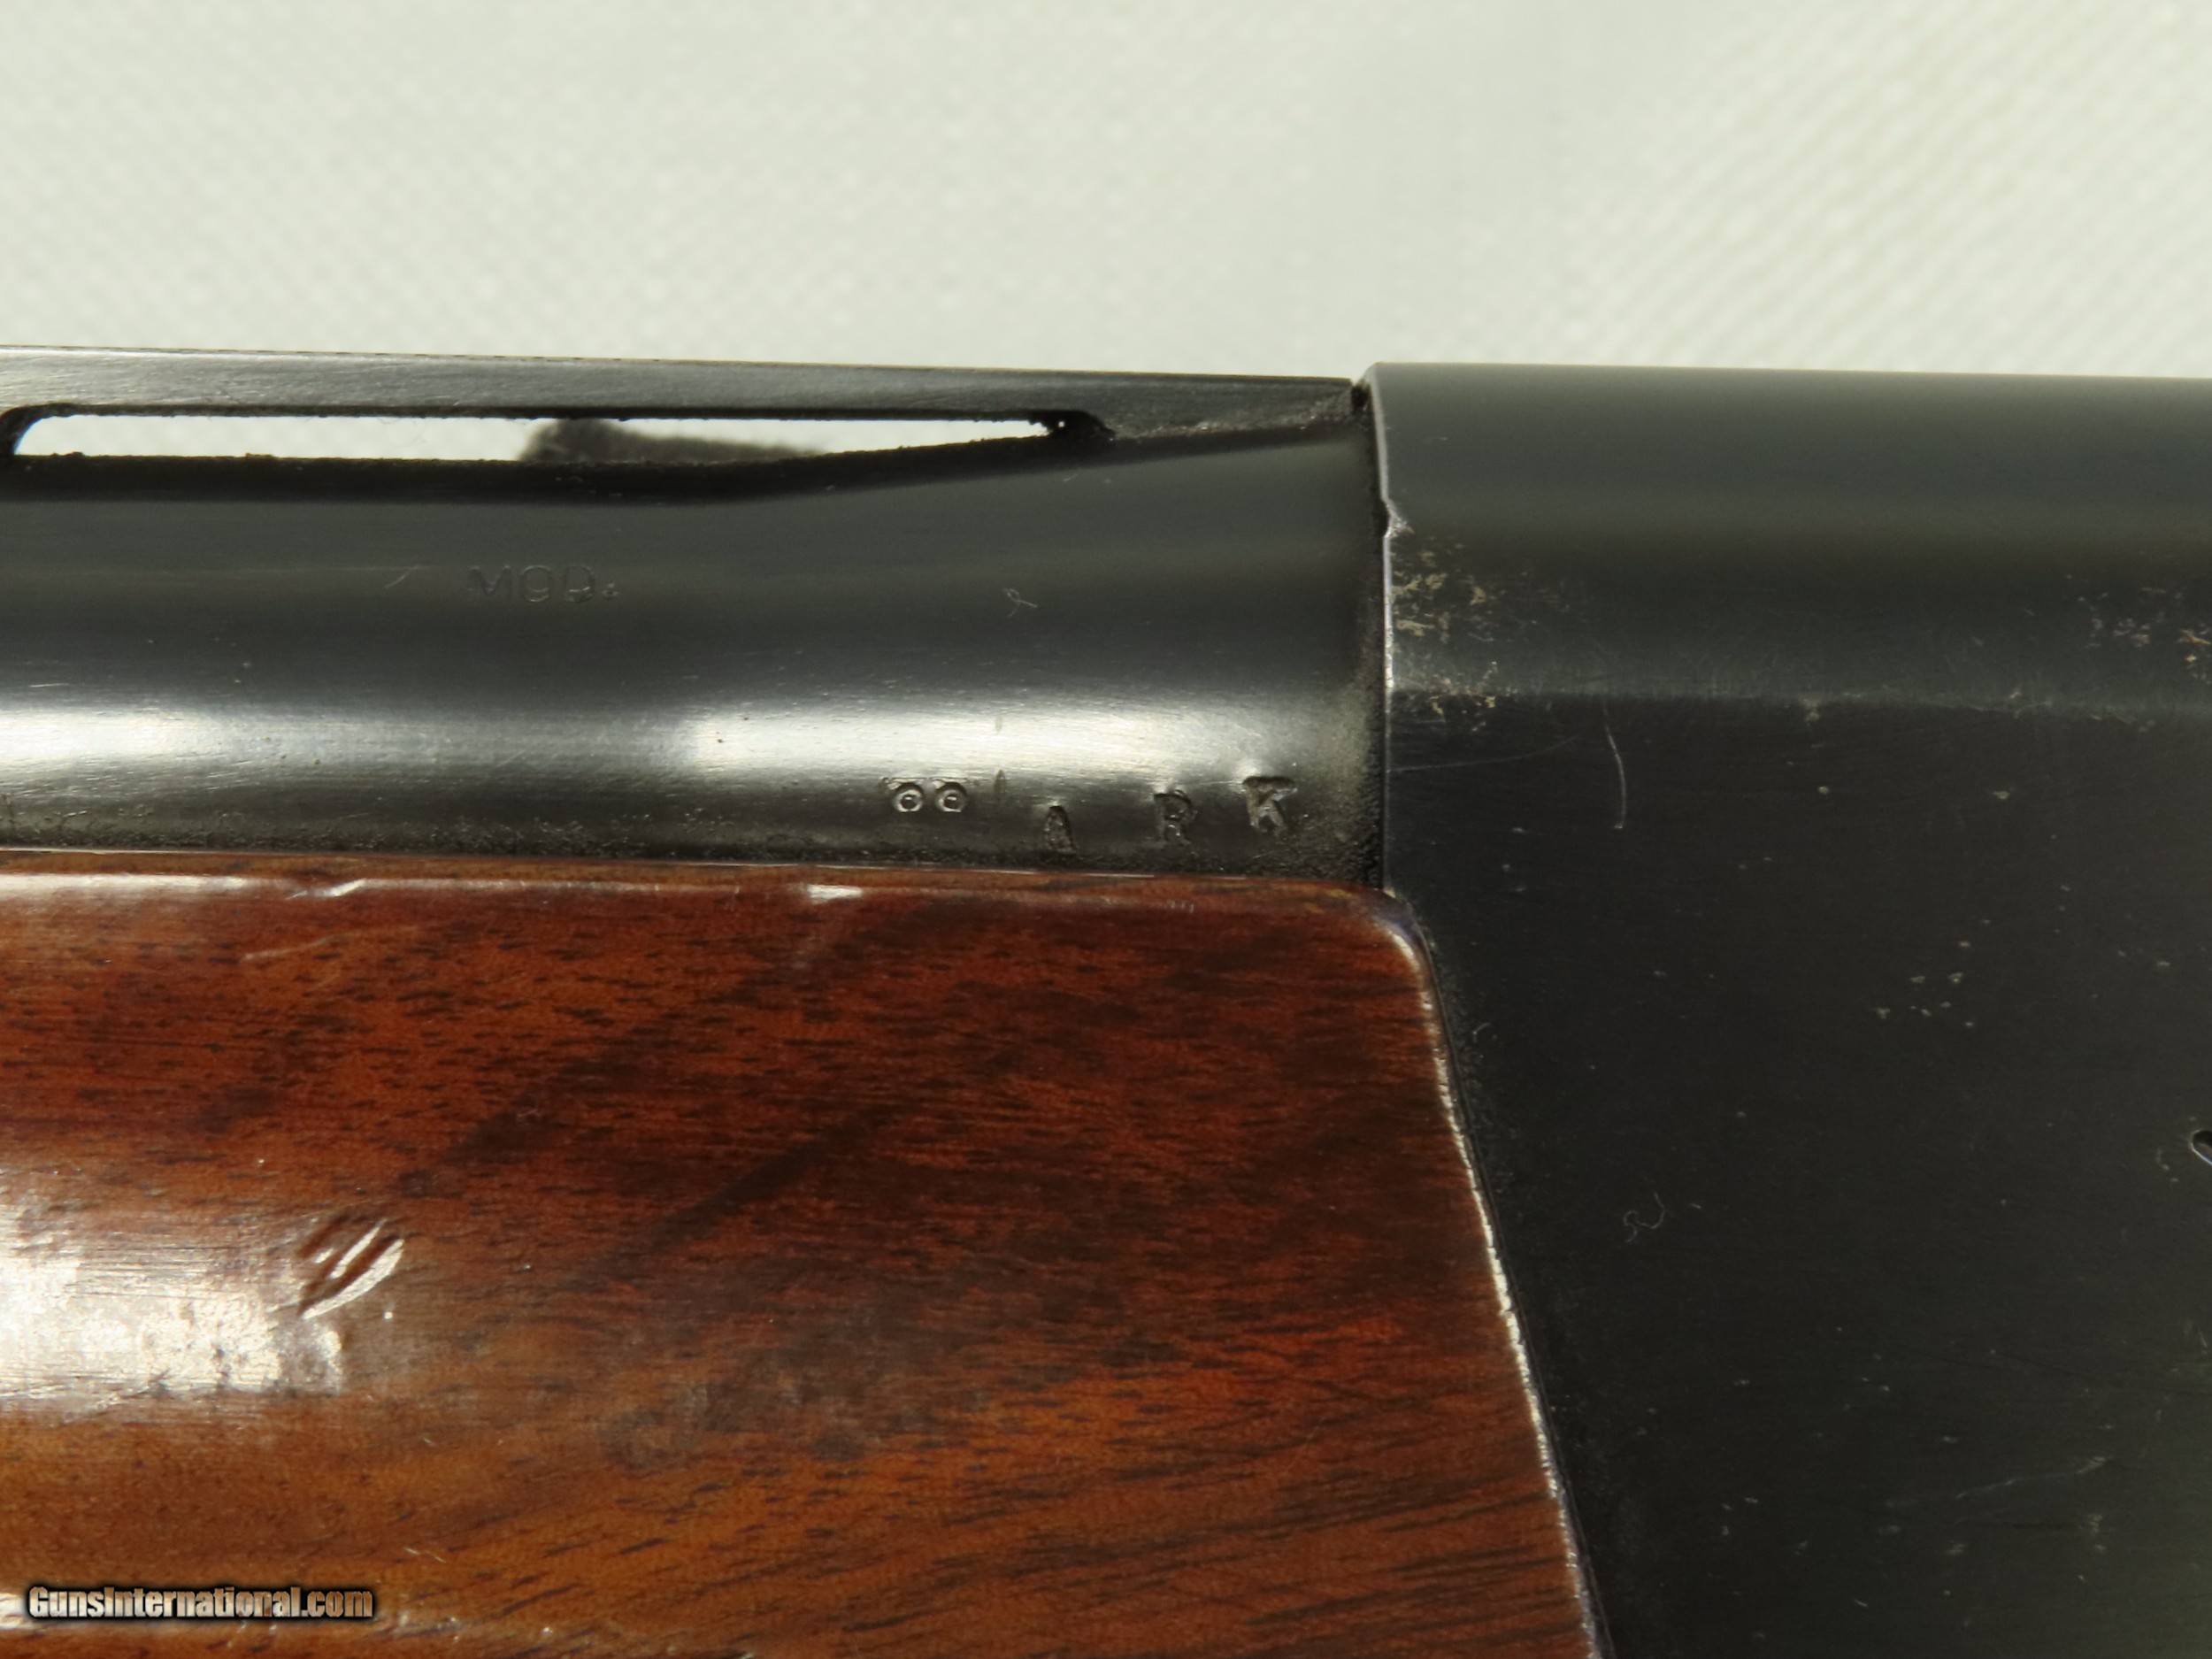 Remington date of manufacture